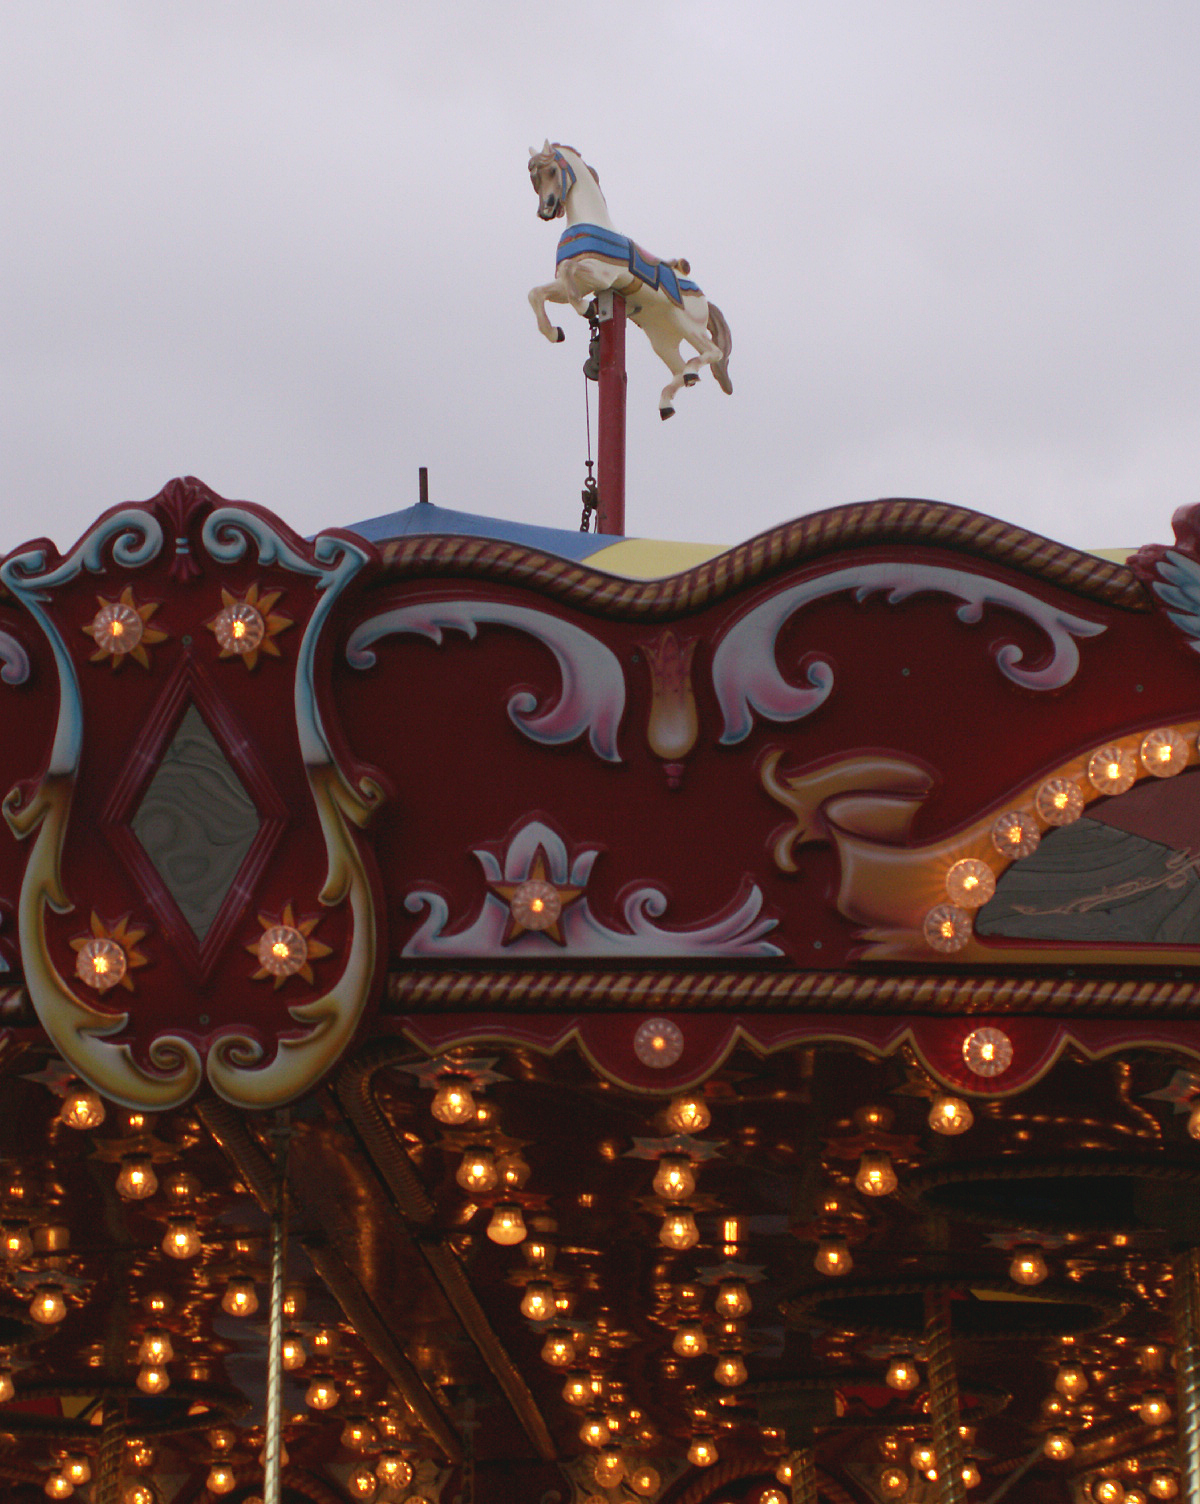 an ornately decorated ride on a fairground with lights in the background